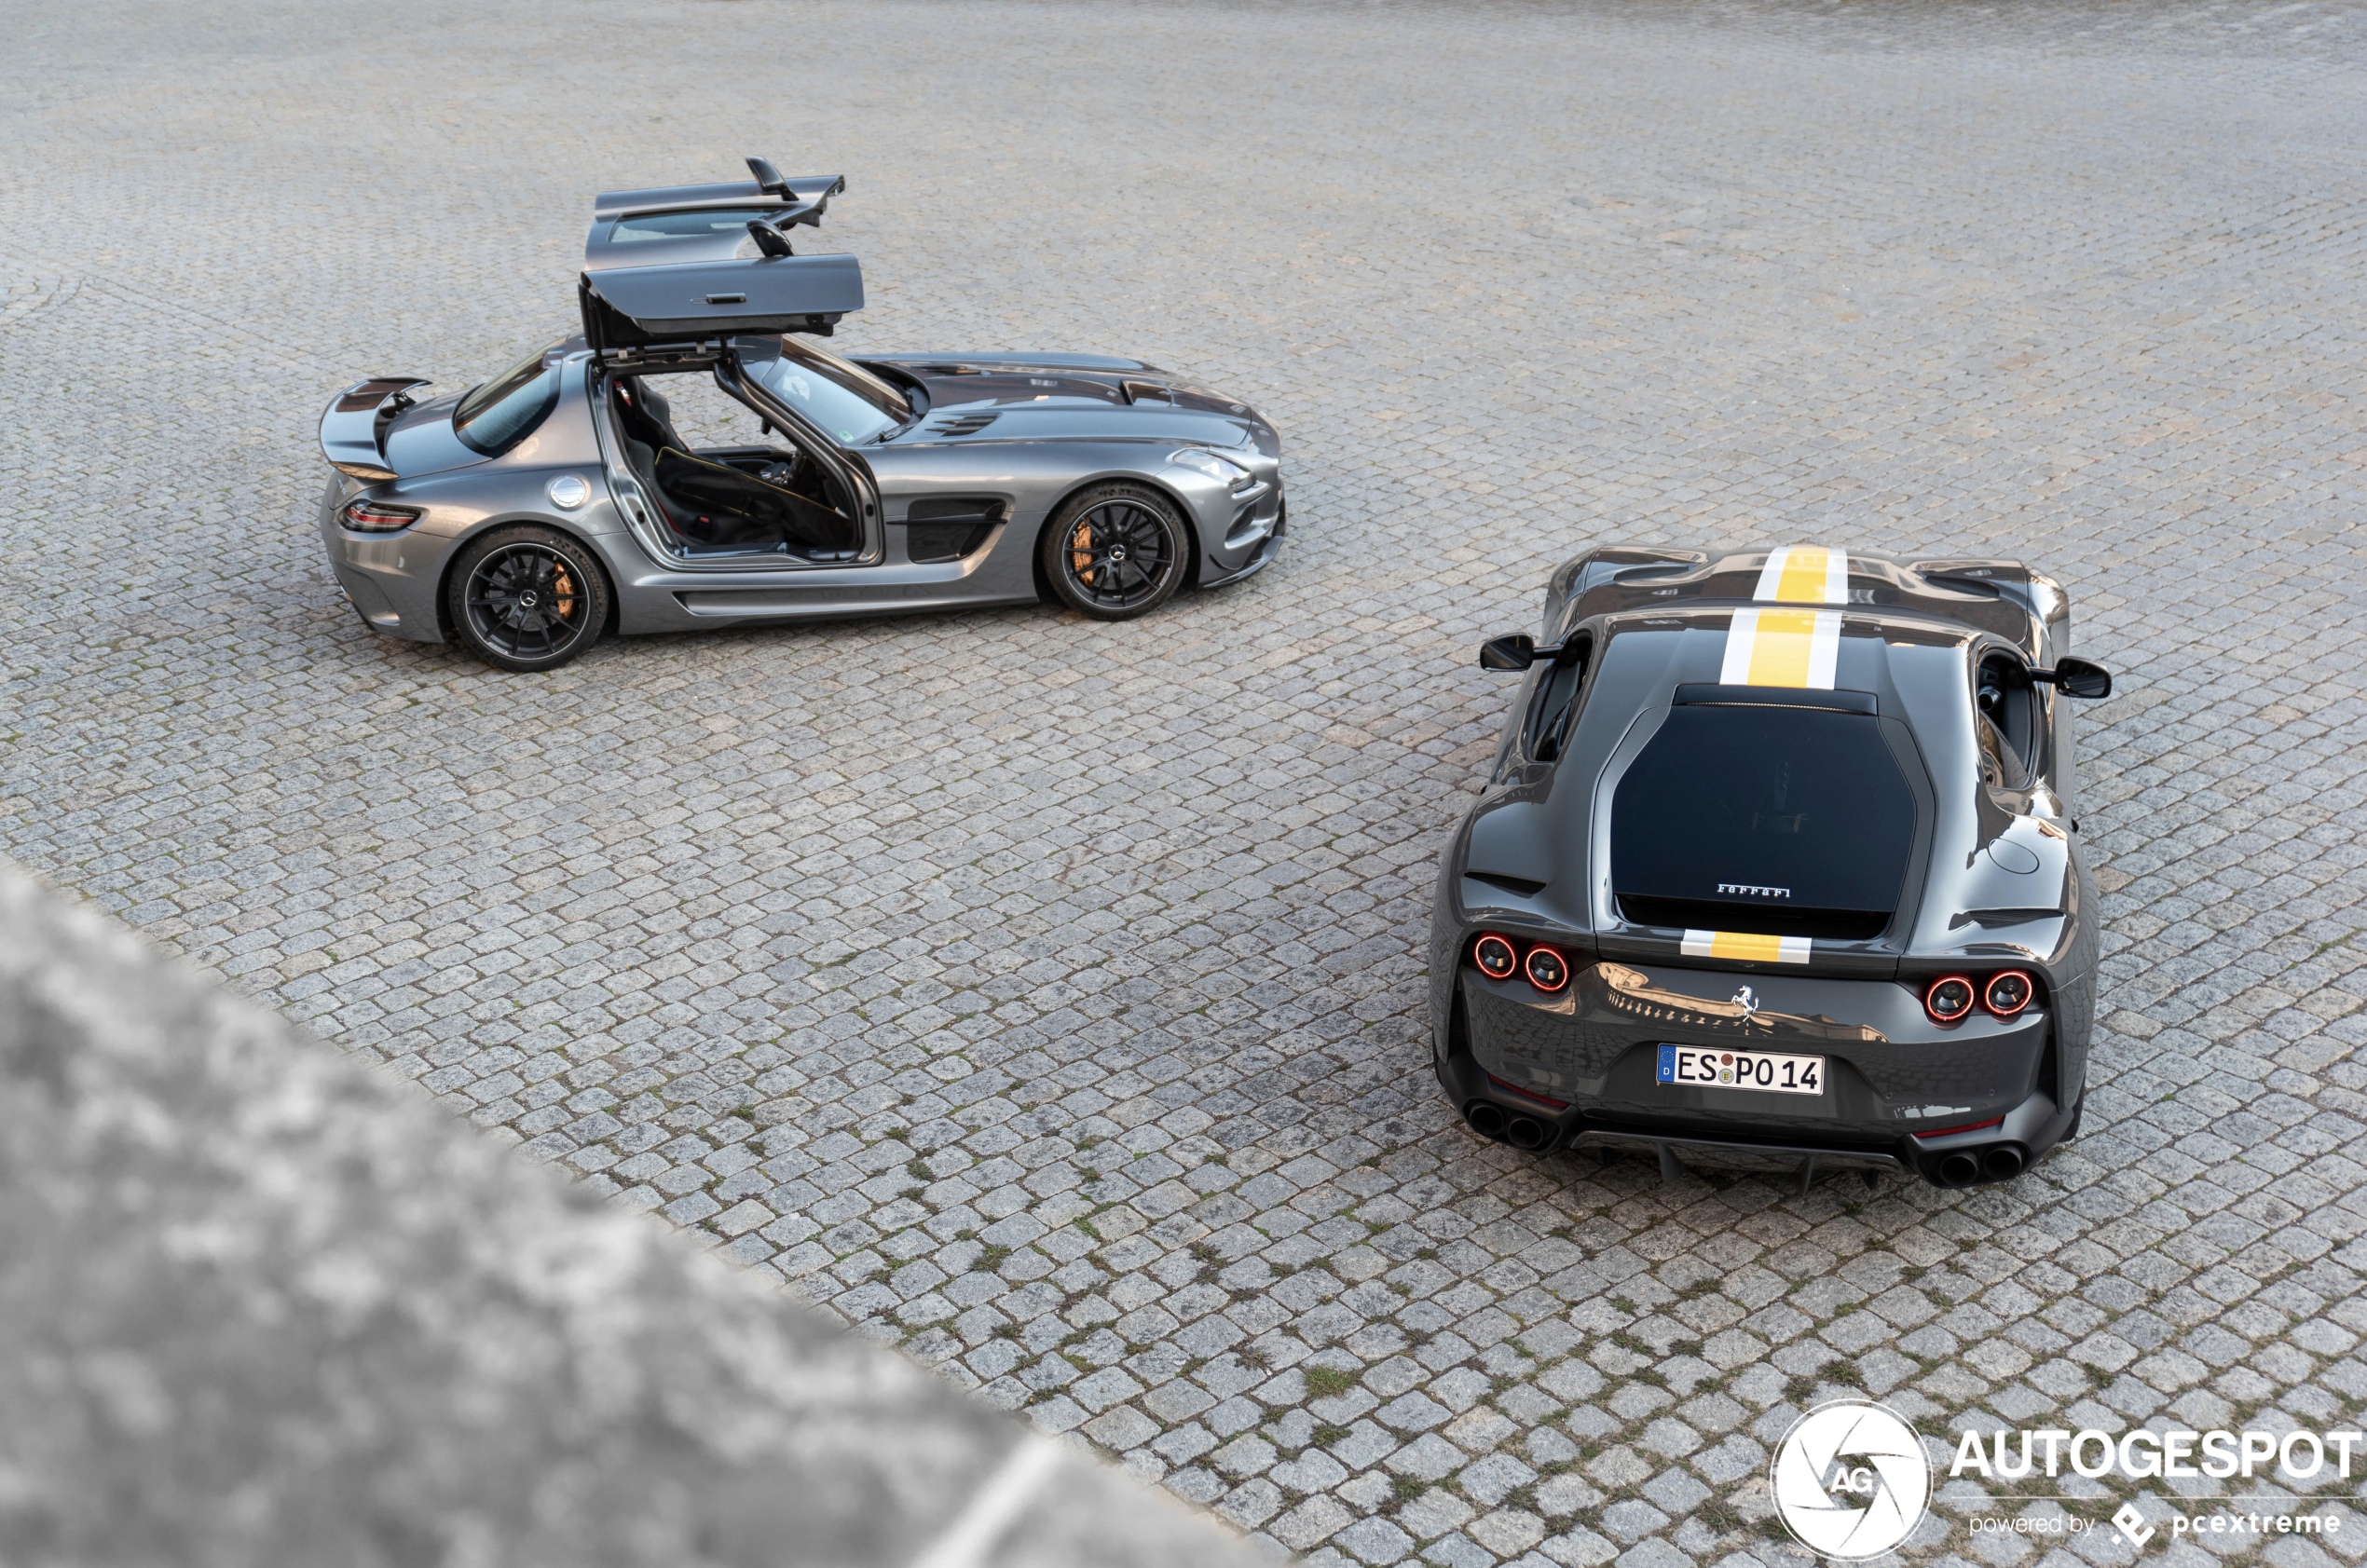 SLS AMG Black Series spotted in all its glory